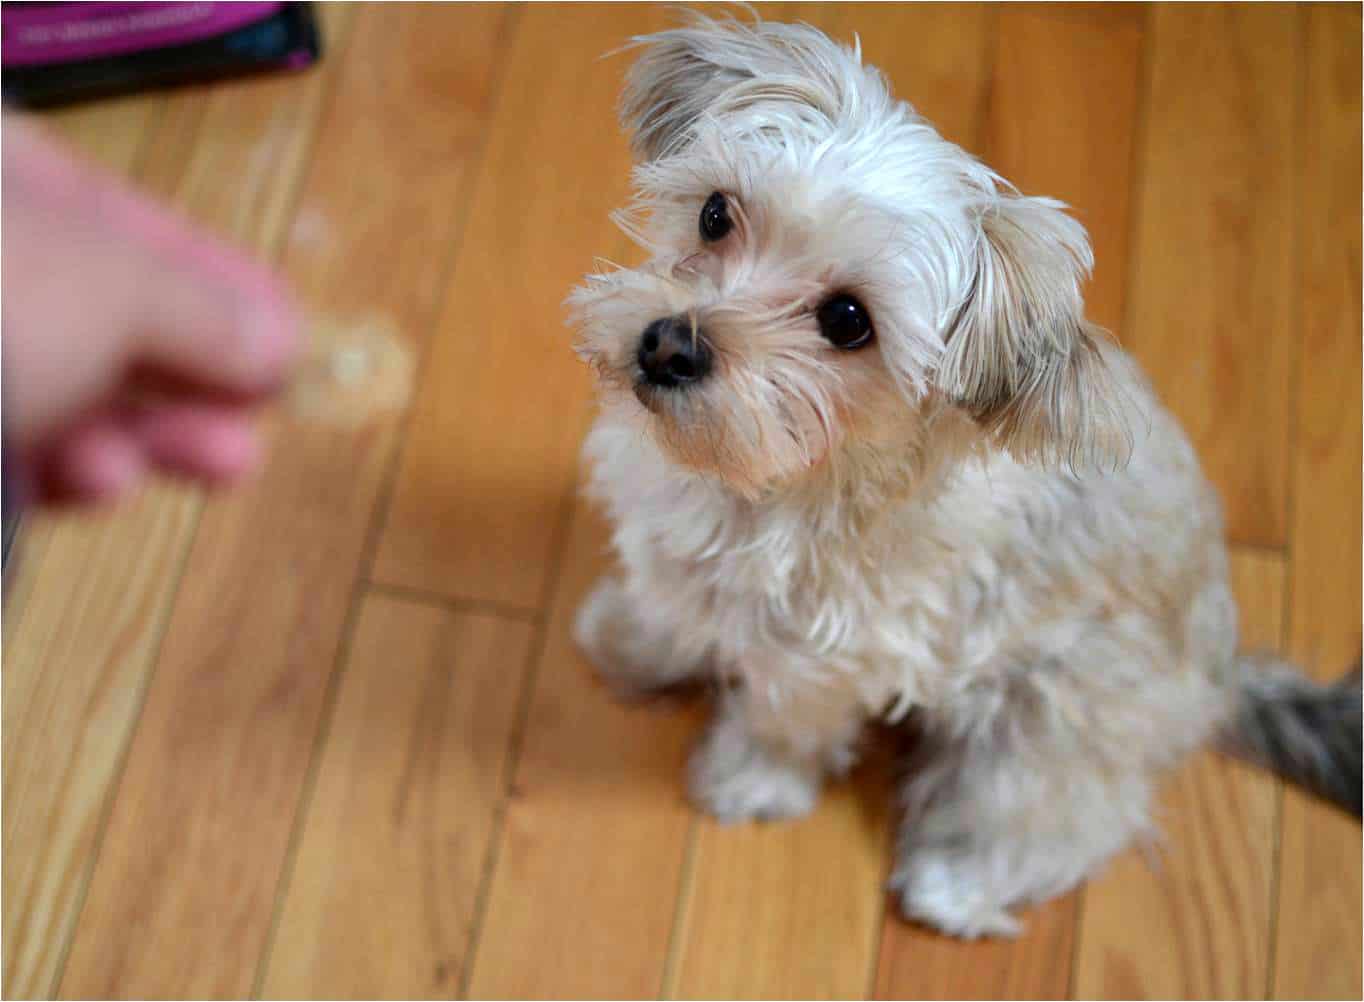 A morkie sitting on the ground waiting for a treat.